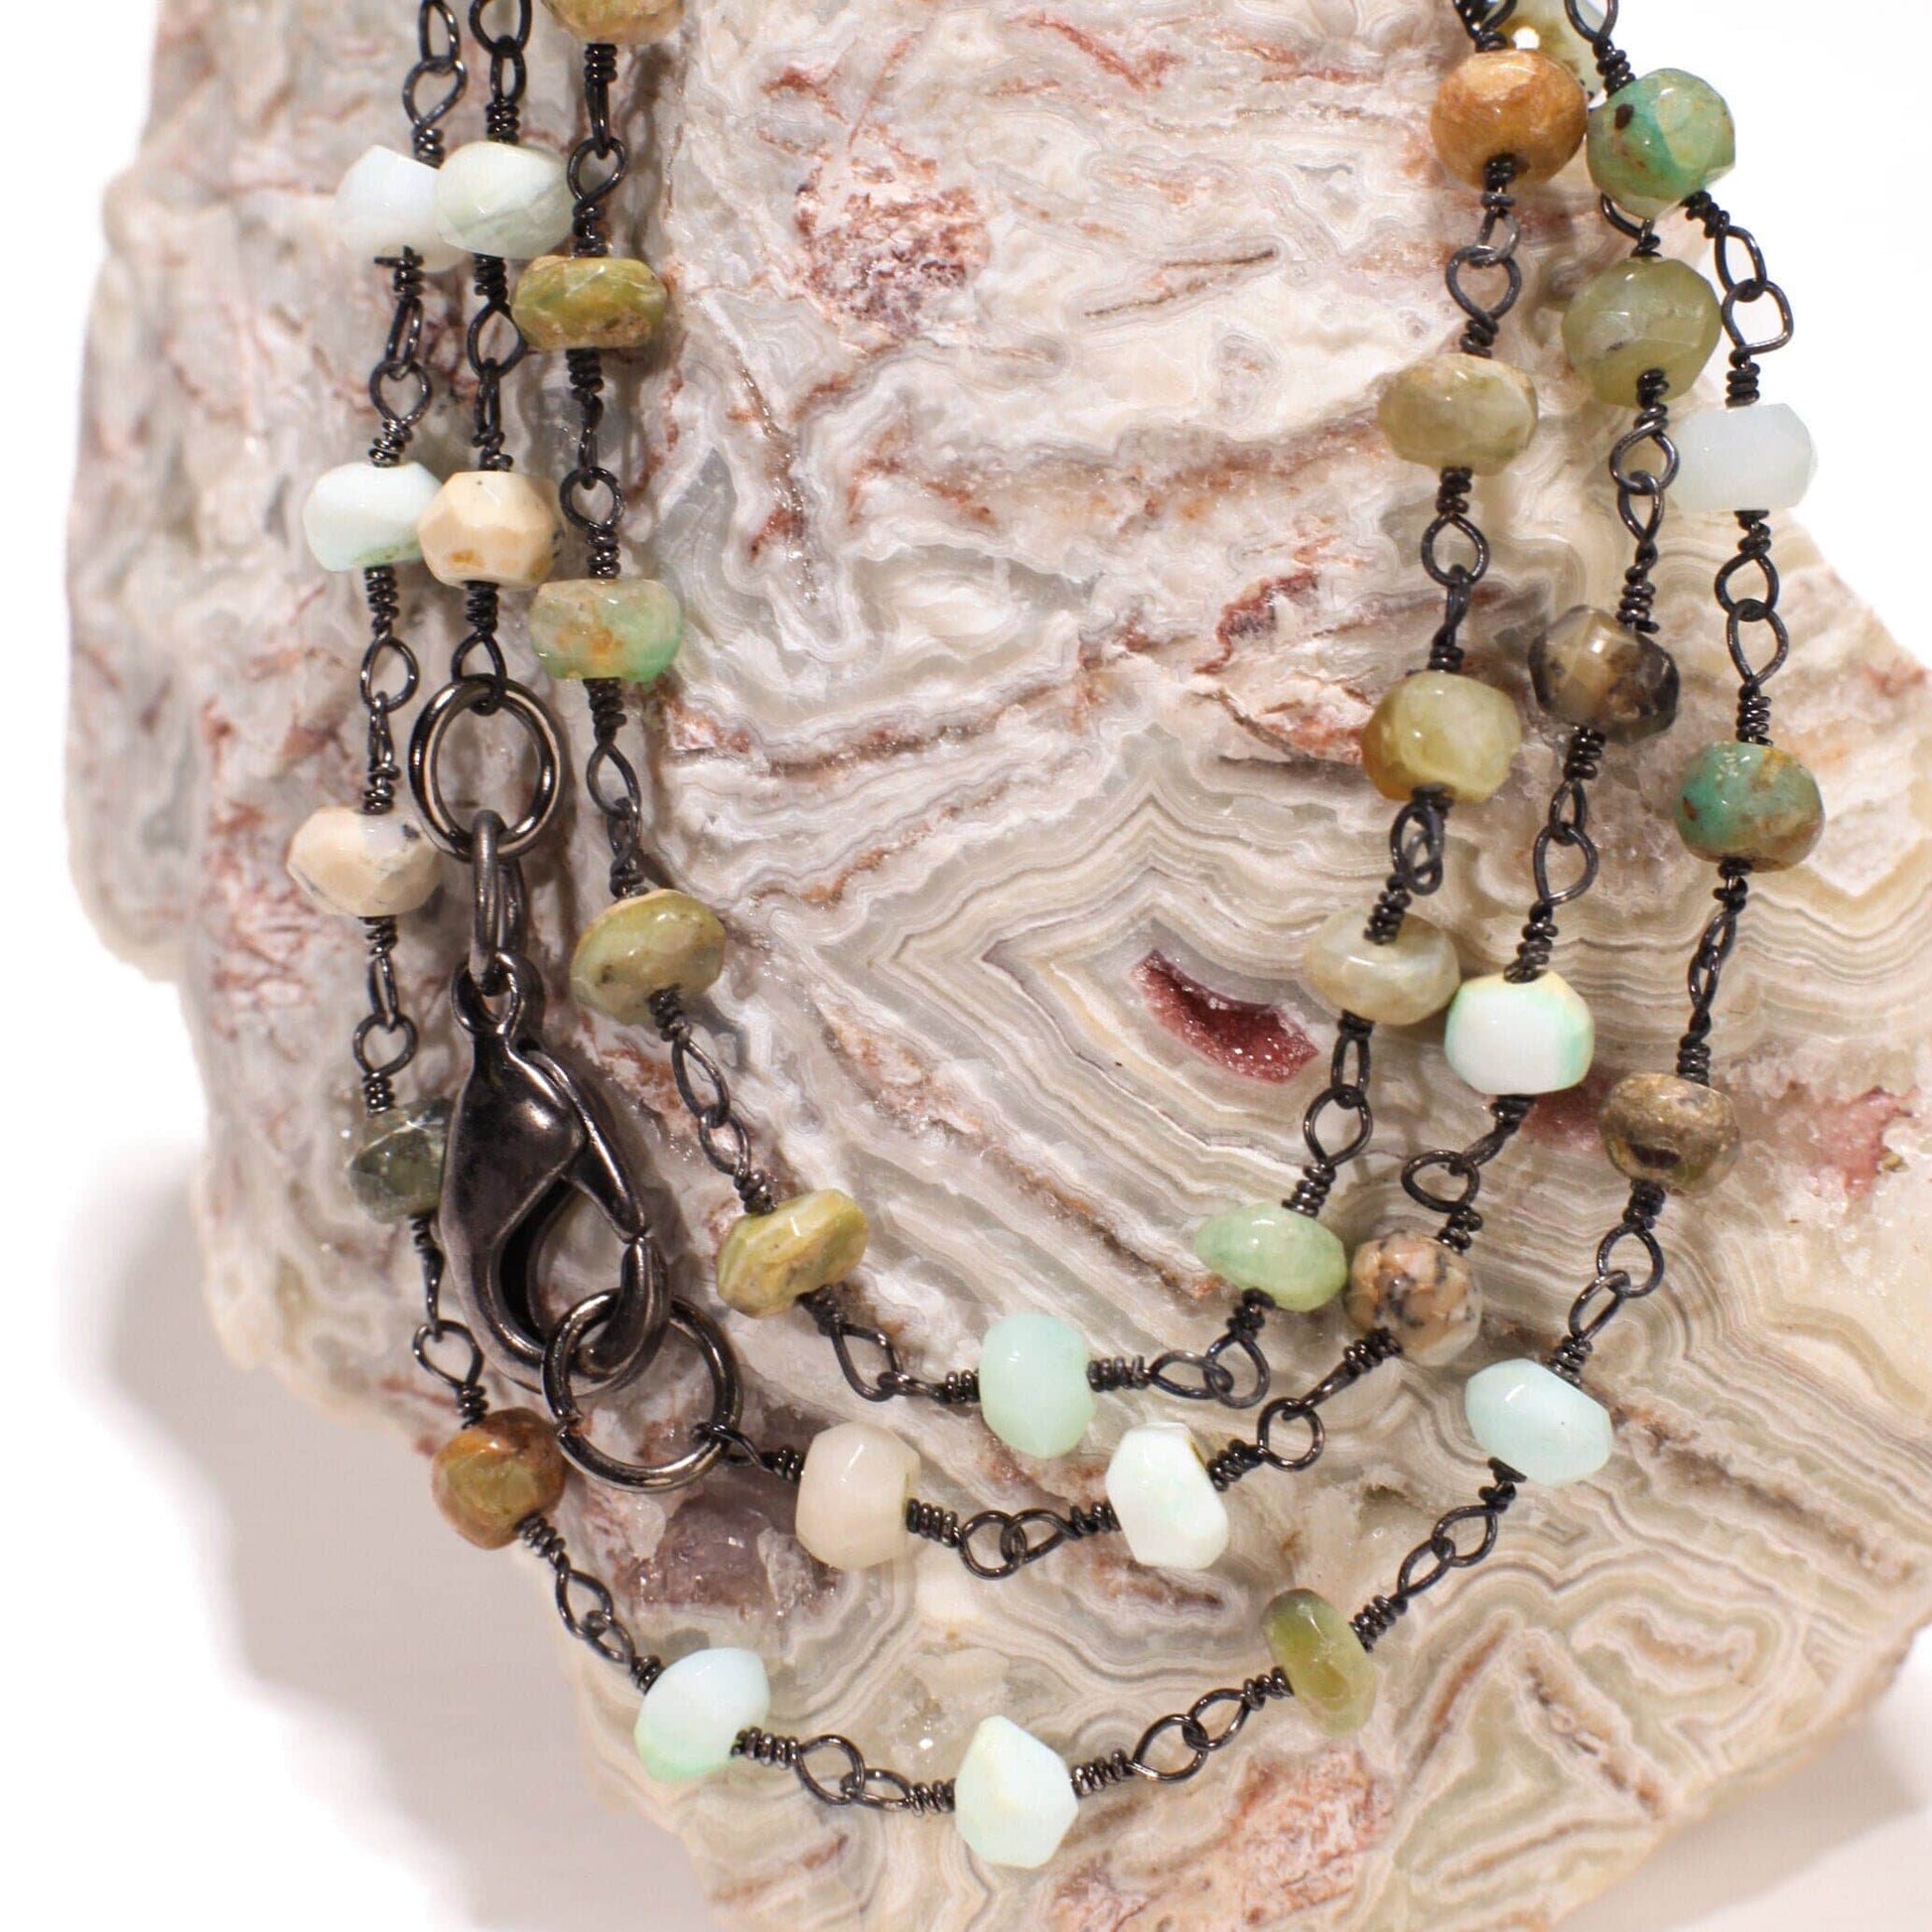 Labradorite,Tourmaline,Peru opalPink Opal,Spinel,Moonstone,Peach Moonstone,Pearl,Rhodonite,Turquoise,Silver Oxidized Finished Chain Necklace